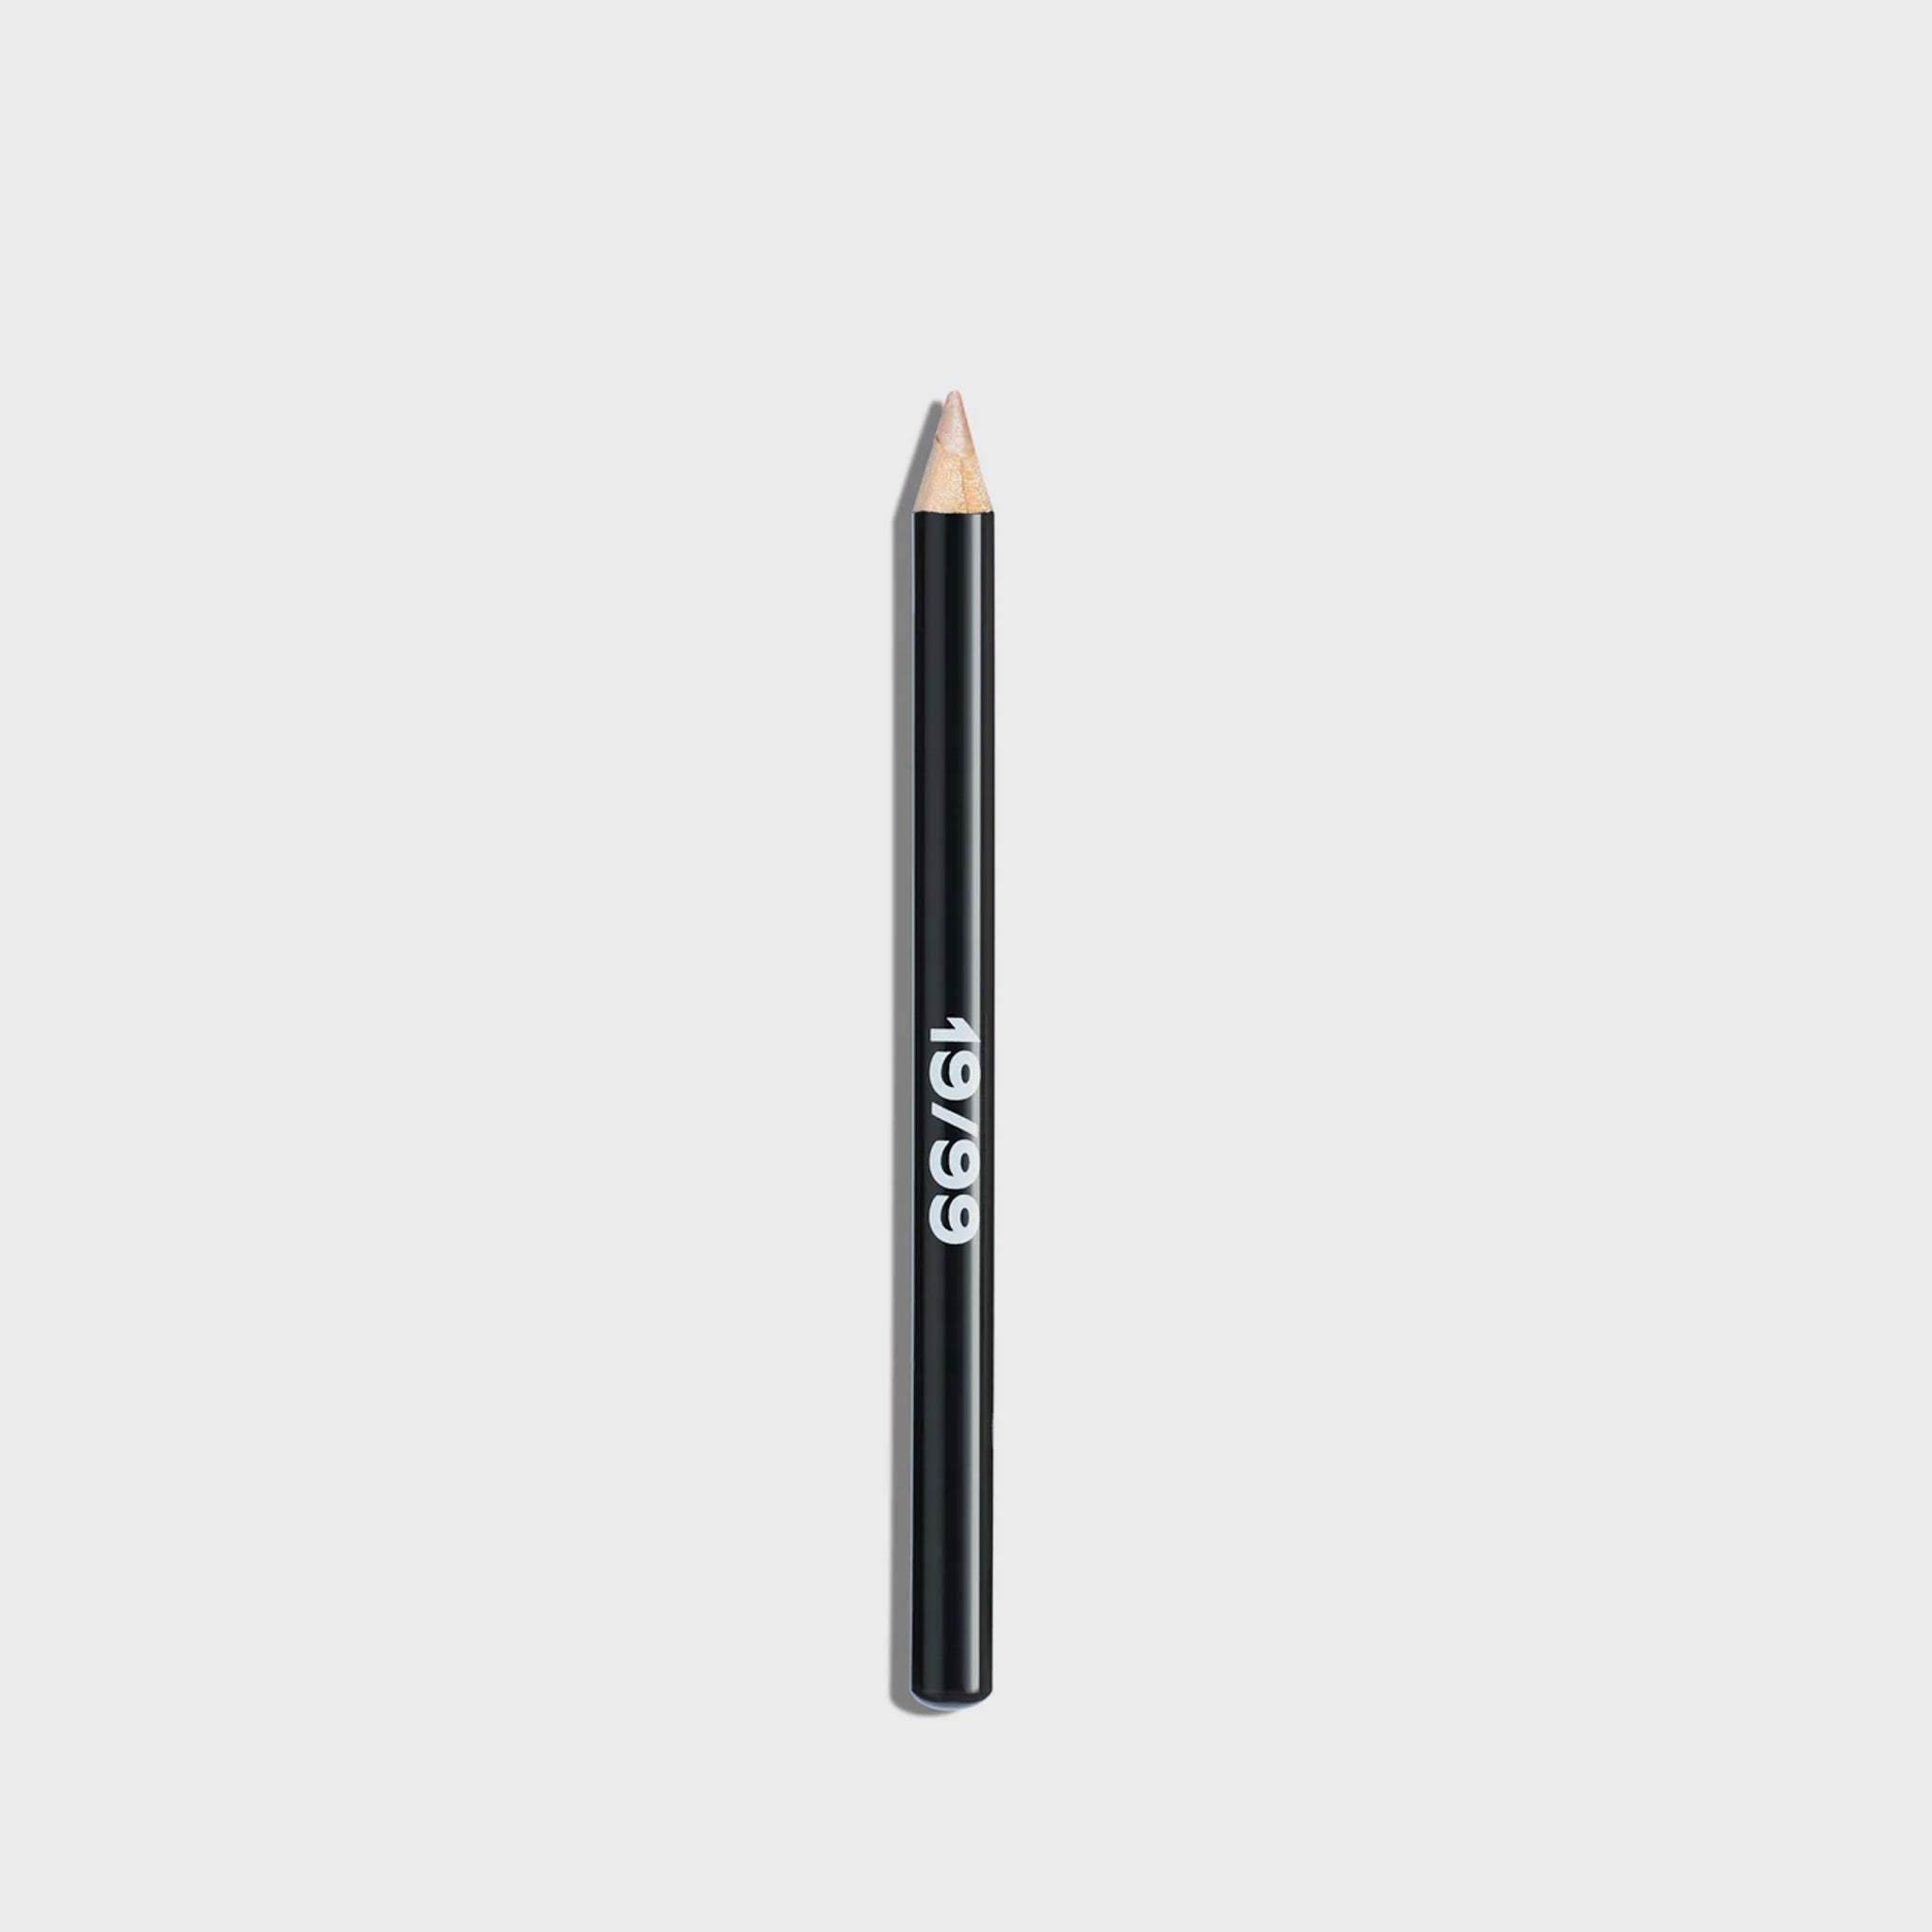 Makeup highlighting pencil in champagne gold by 19/99, with a black casing and bold 19/99 logo printed on the side of the pencil.